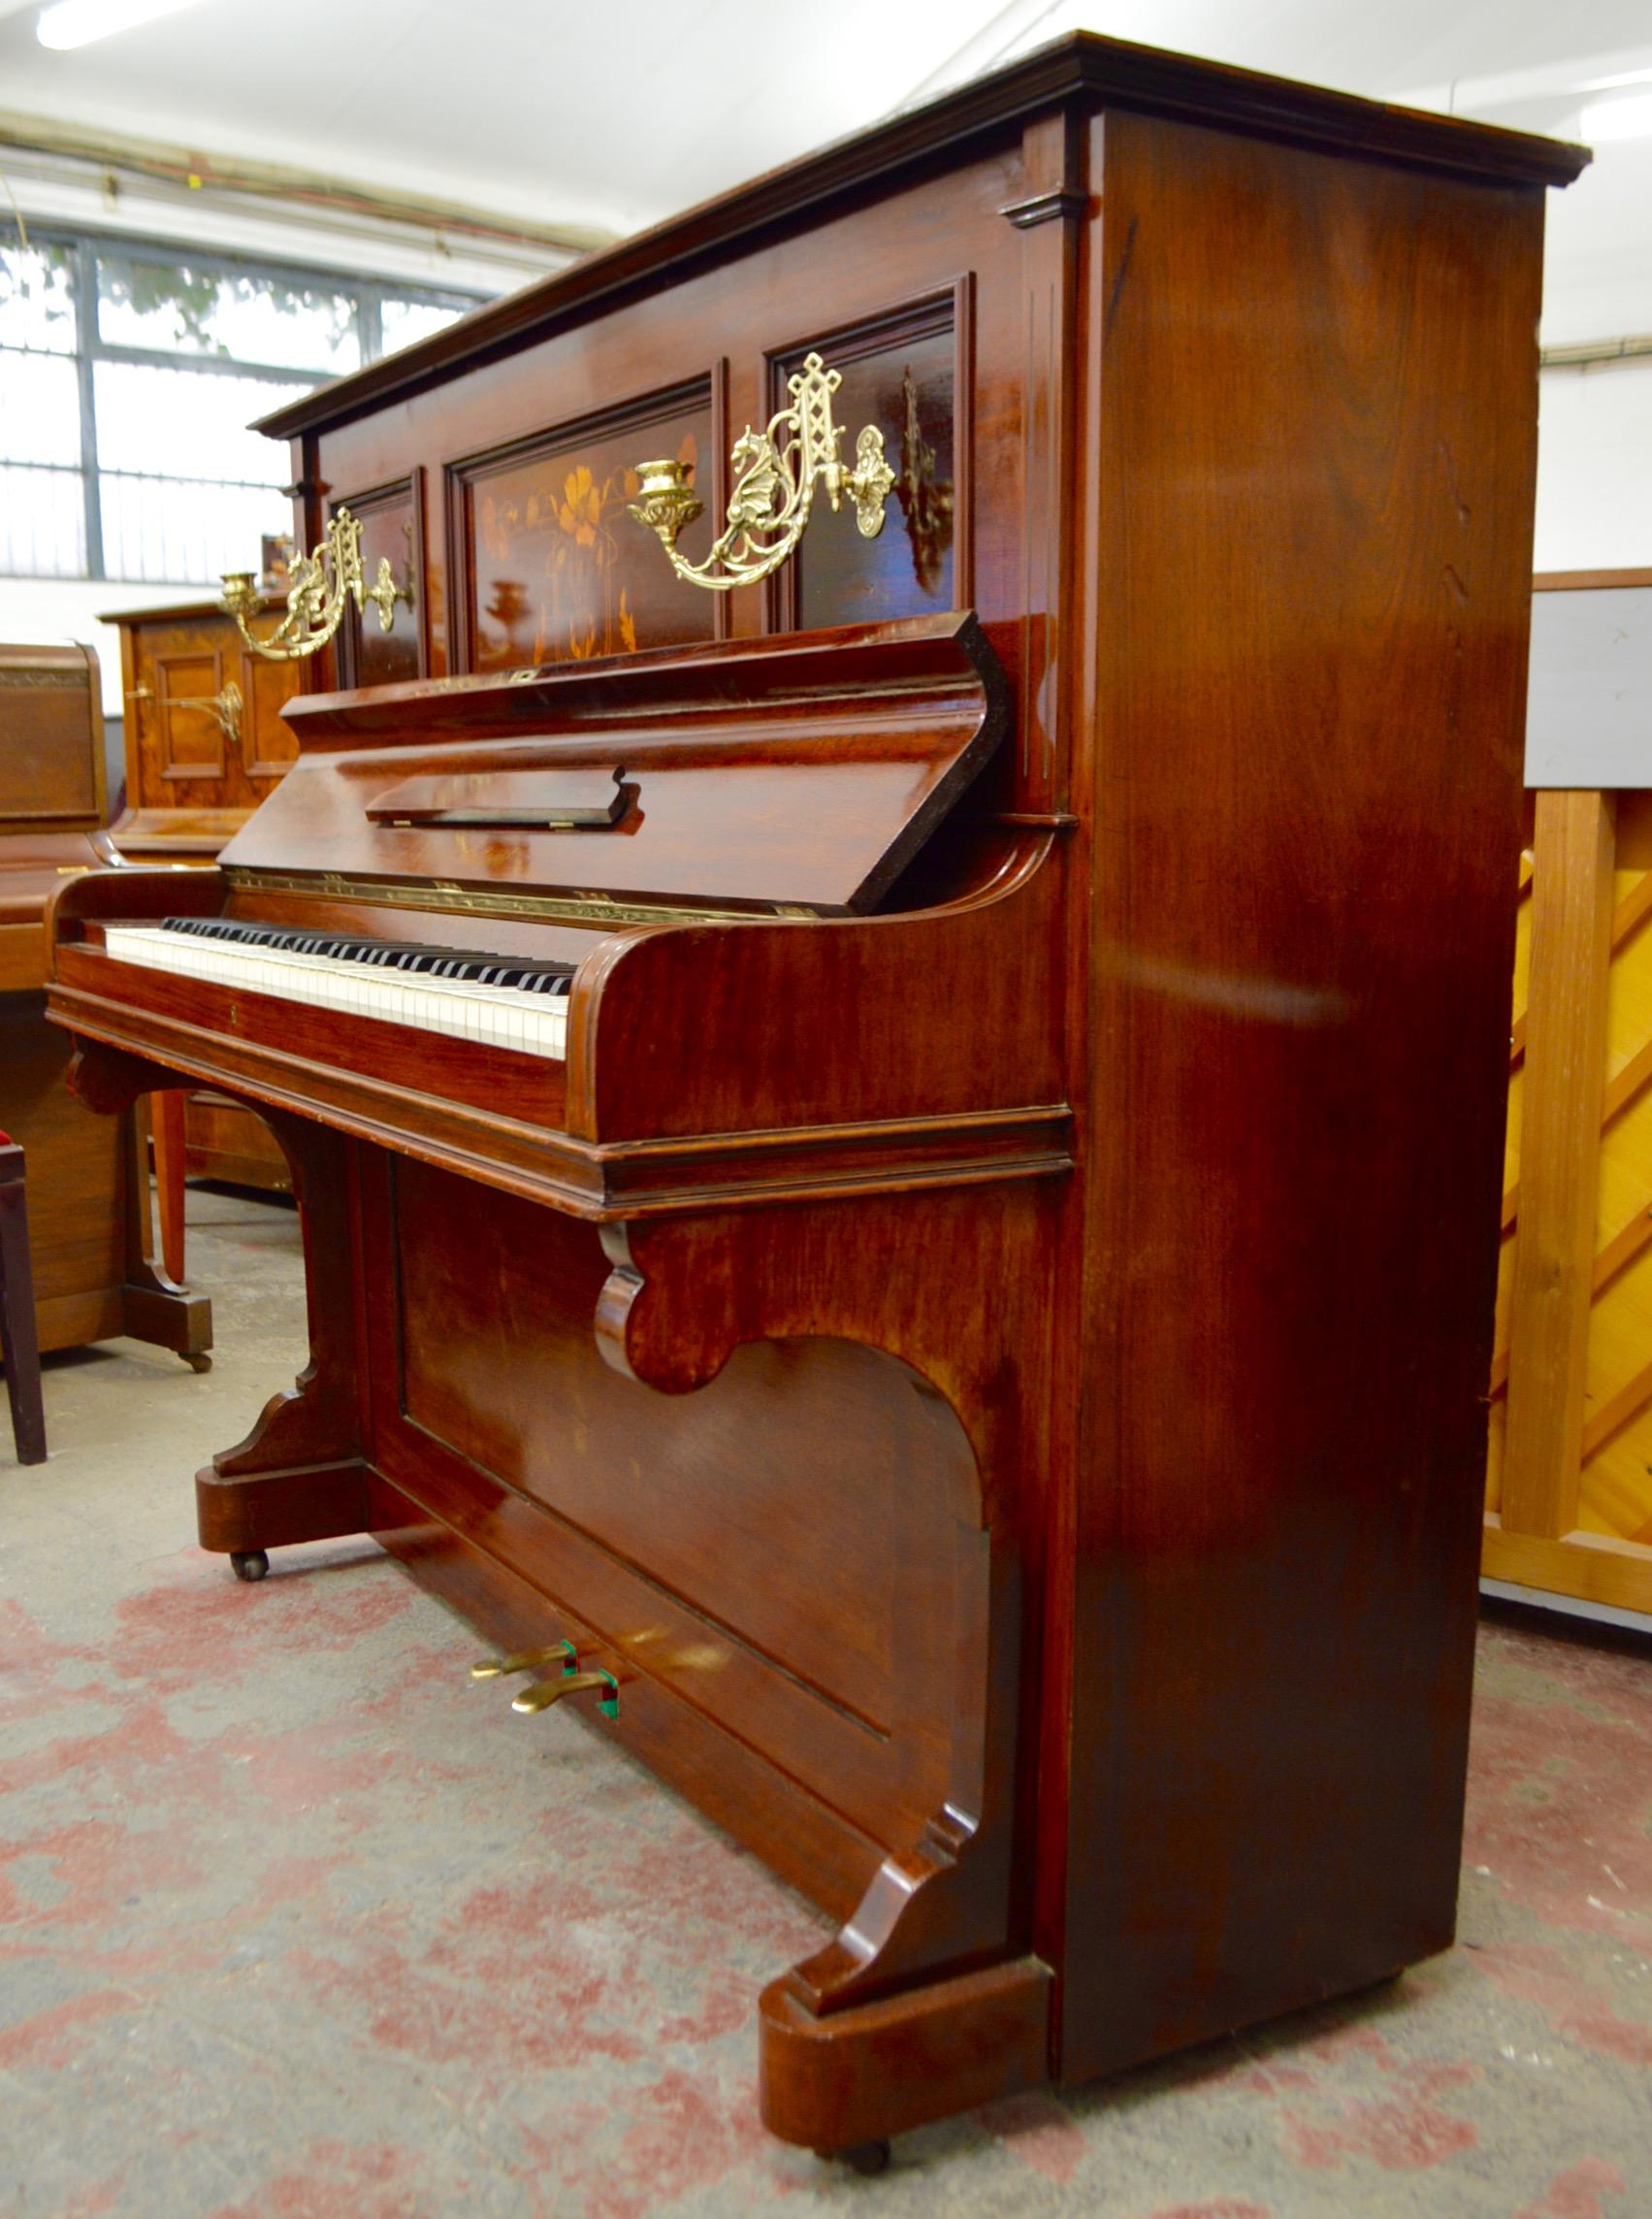 German Made Knauss Piano with Inlaid Rosewood Cabinet and Candelabra 2